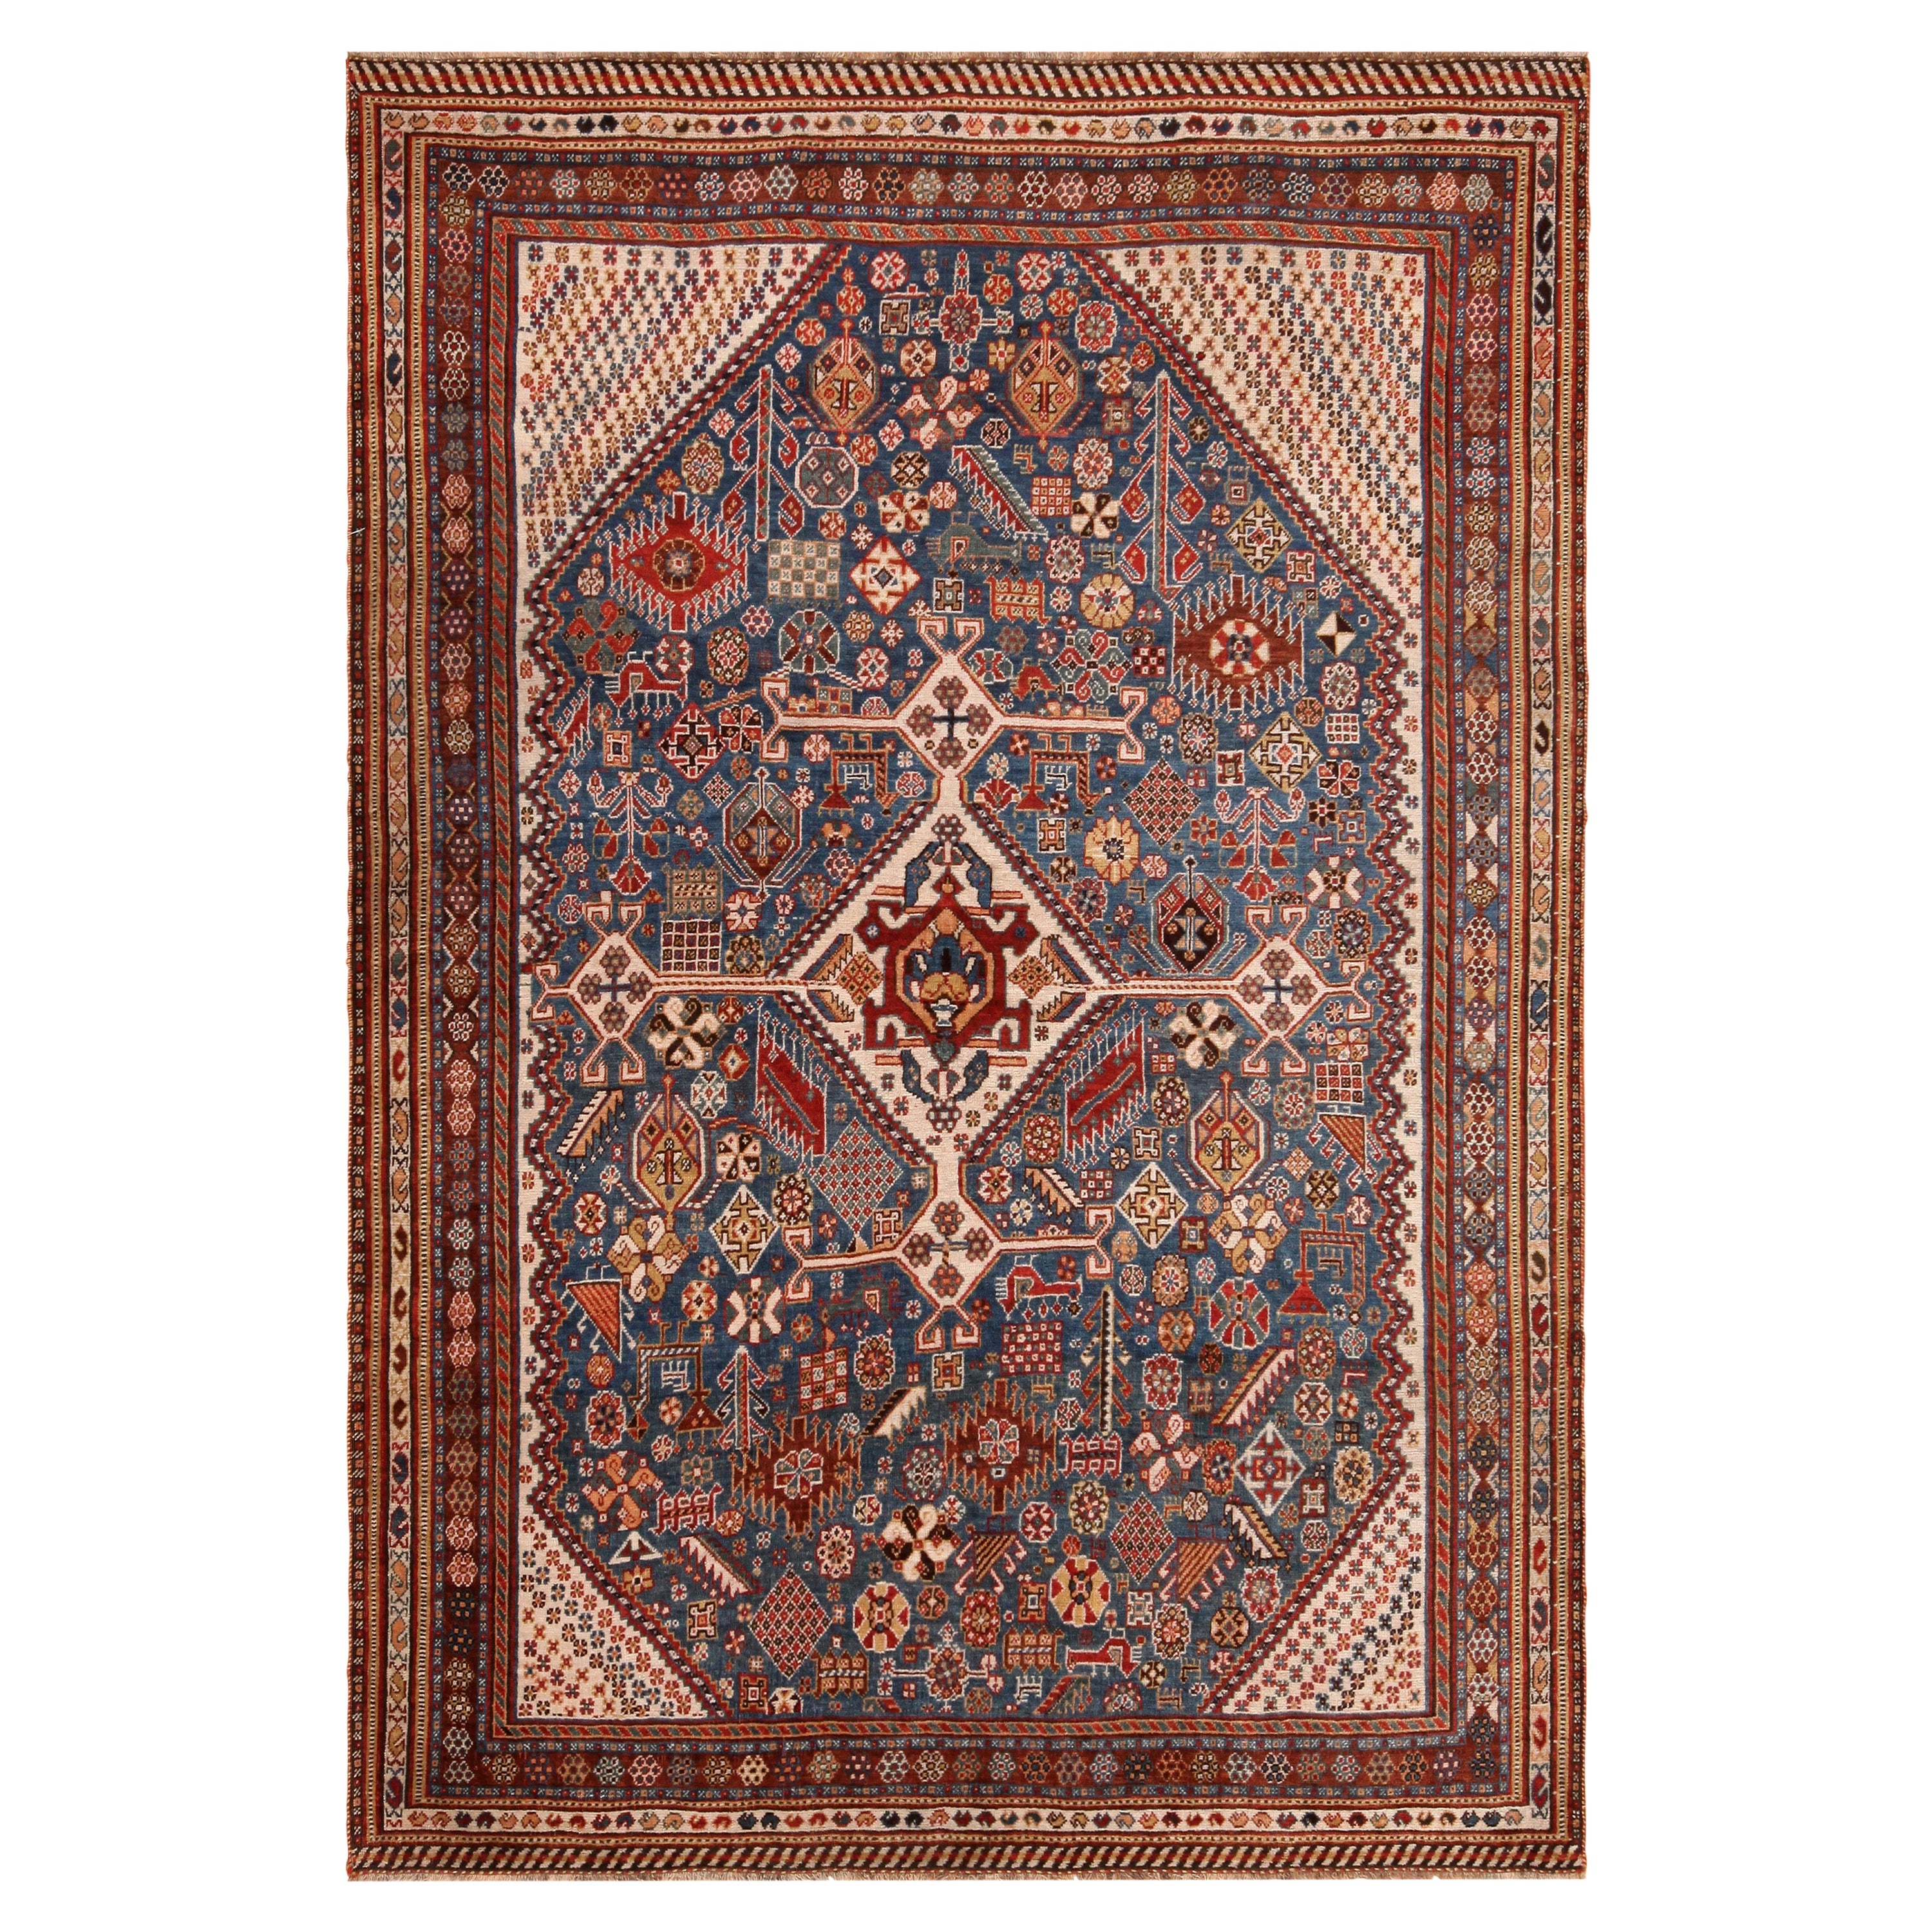 Nazmiyal Collection Antique Persian Qashqai Rug. Size: 4 ft 10 in x 7 ft 2 in